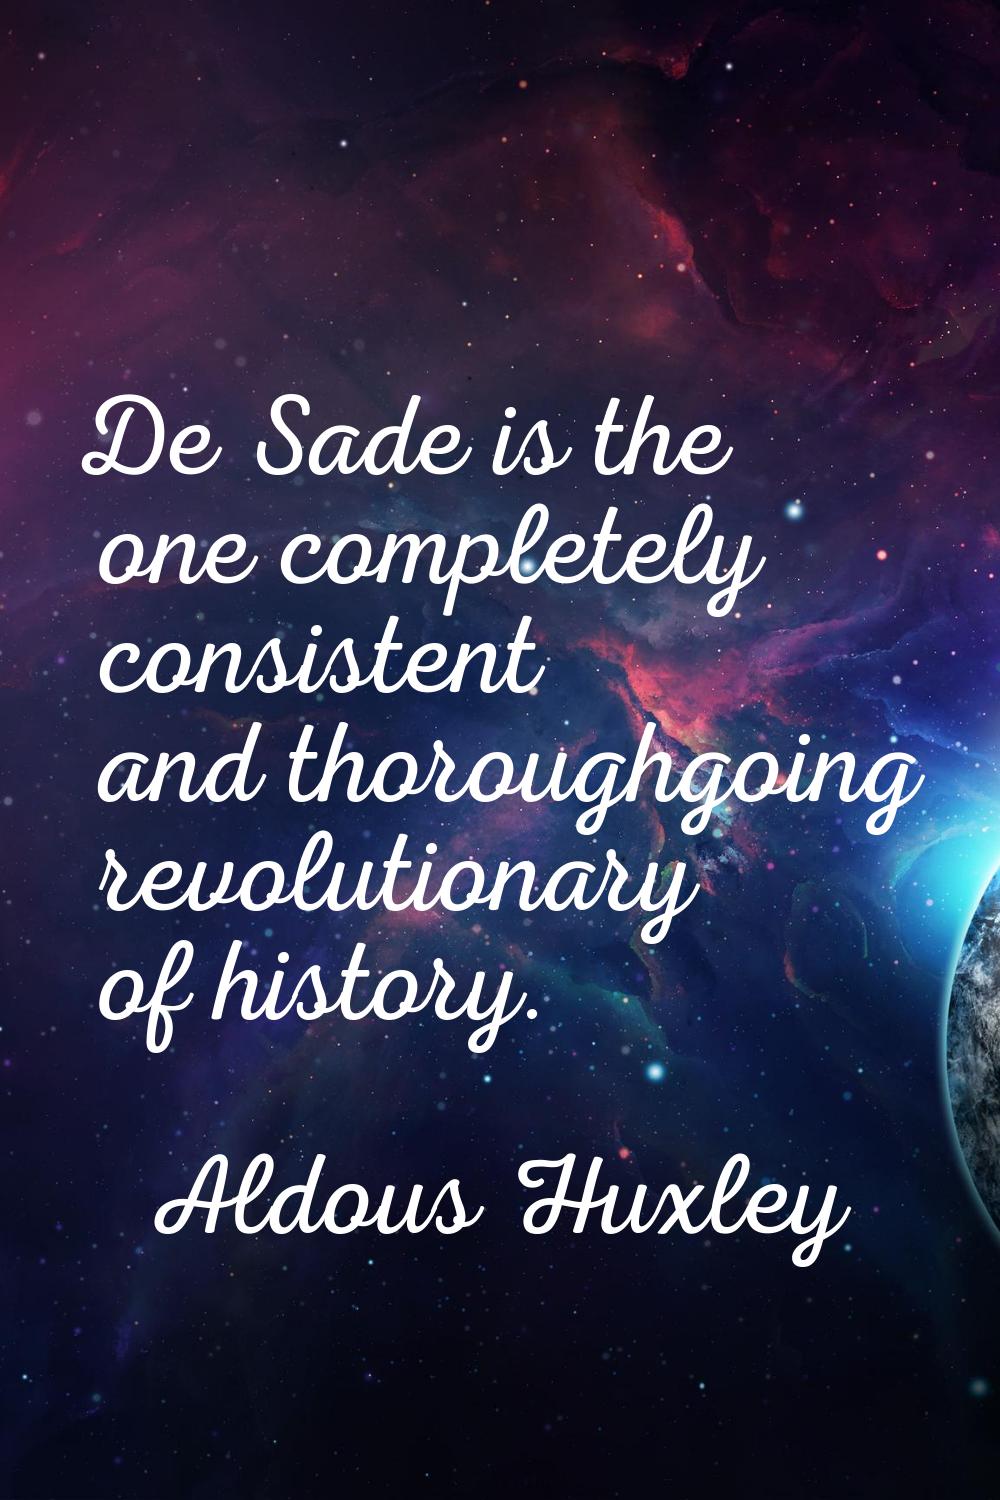 De Sade is the one completely consistent and thoroughgoing revolutionary of history.